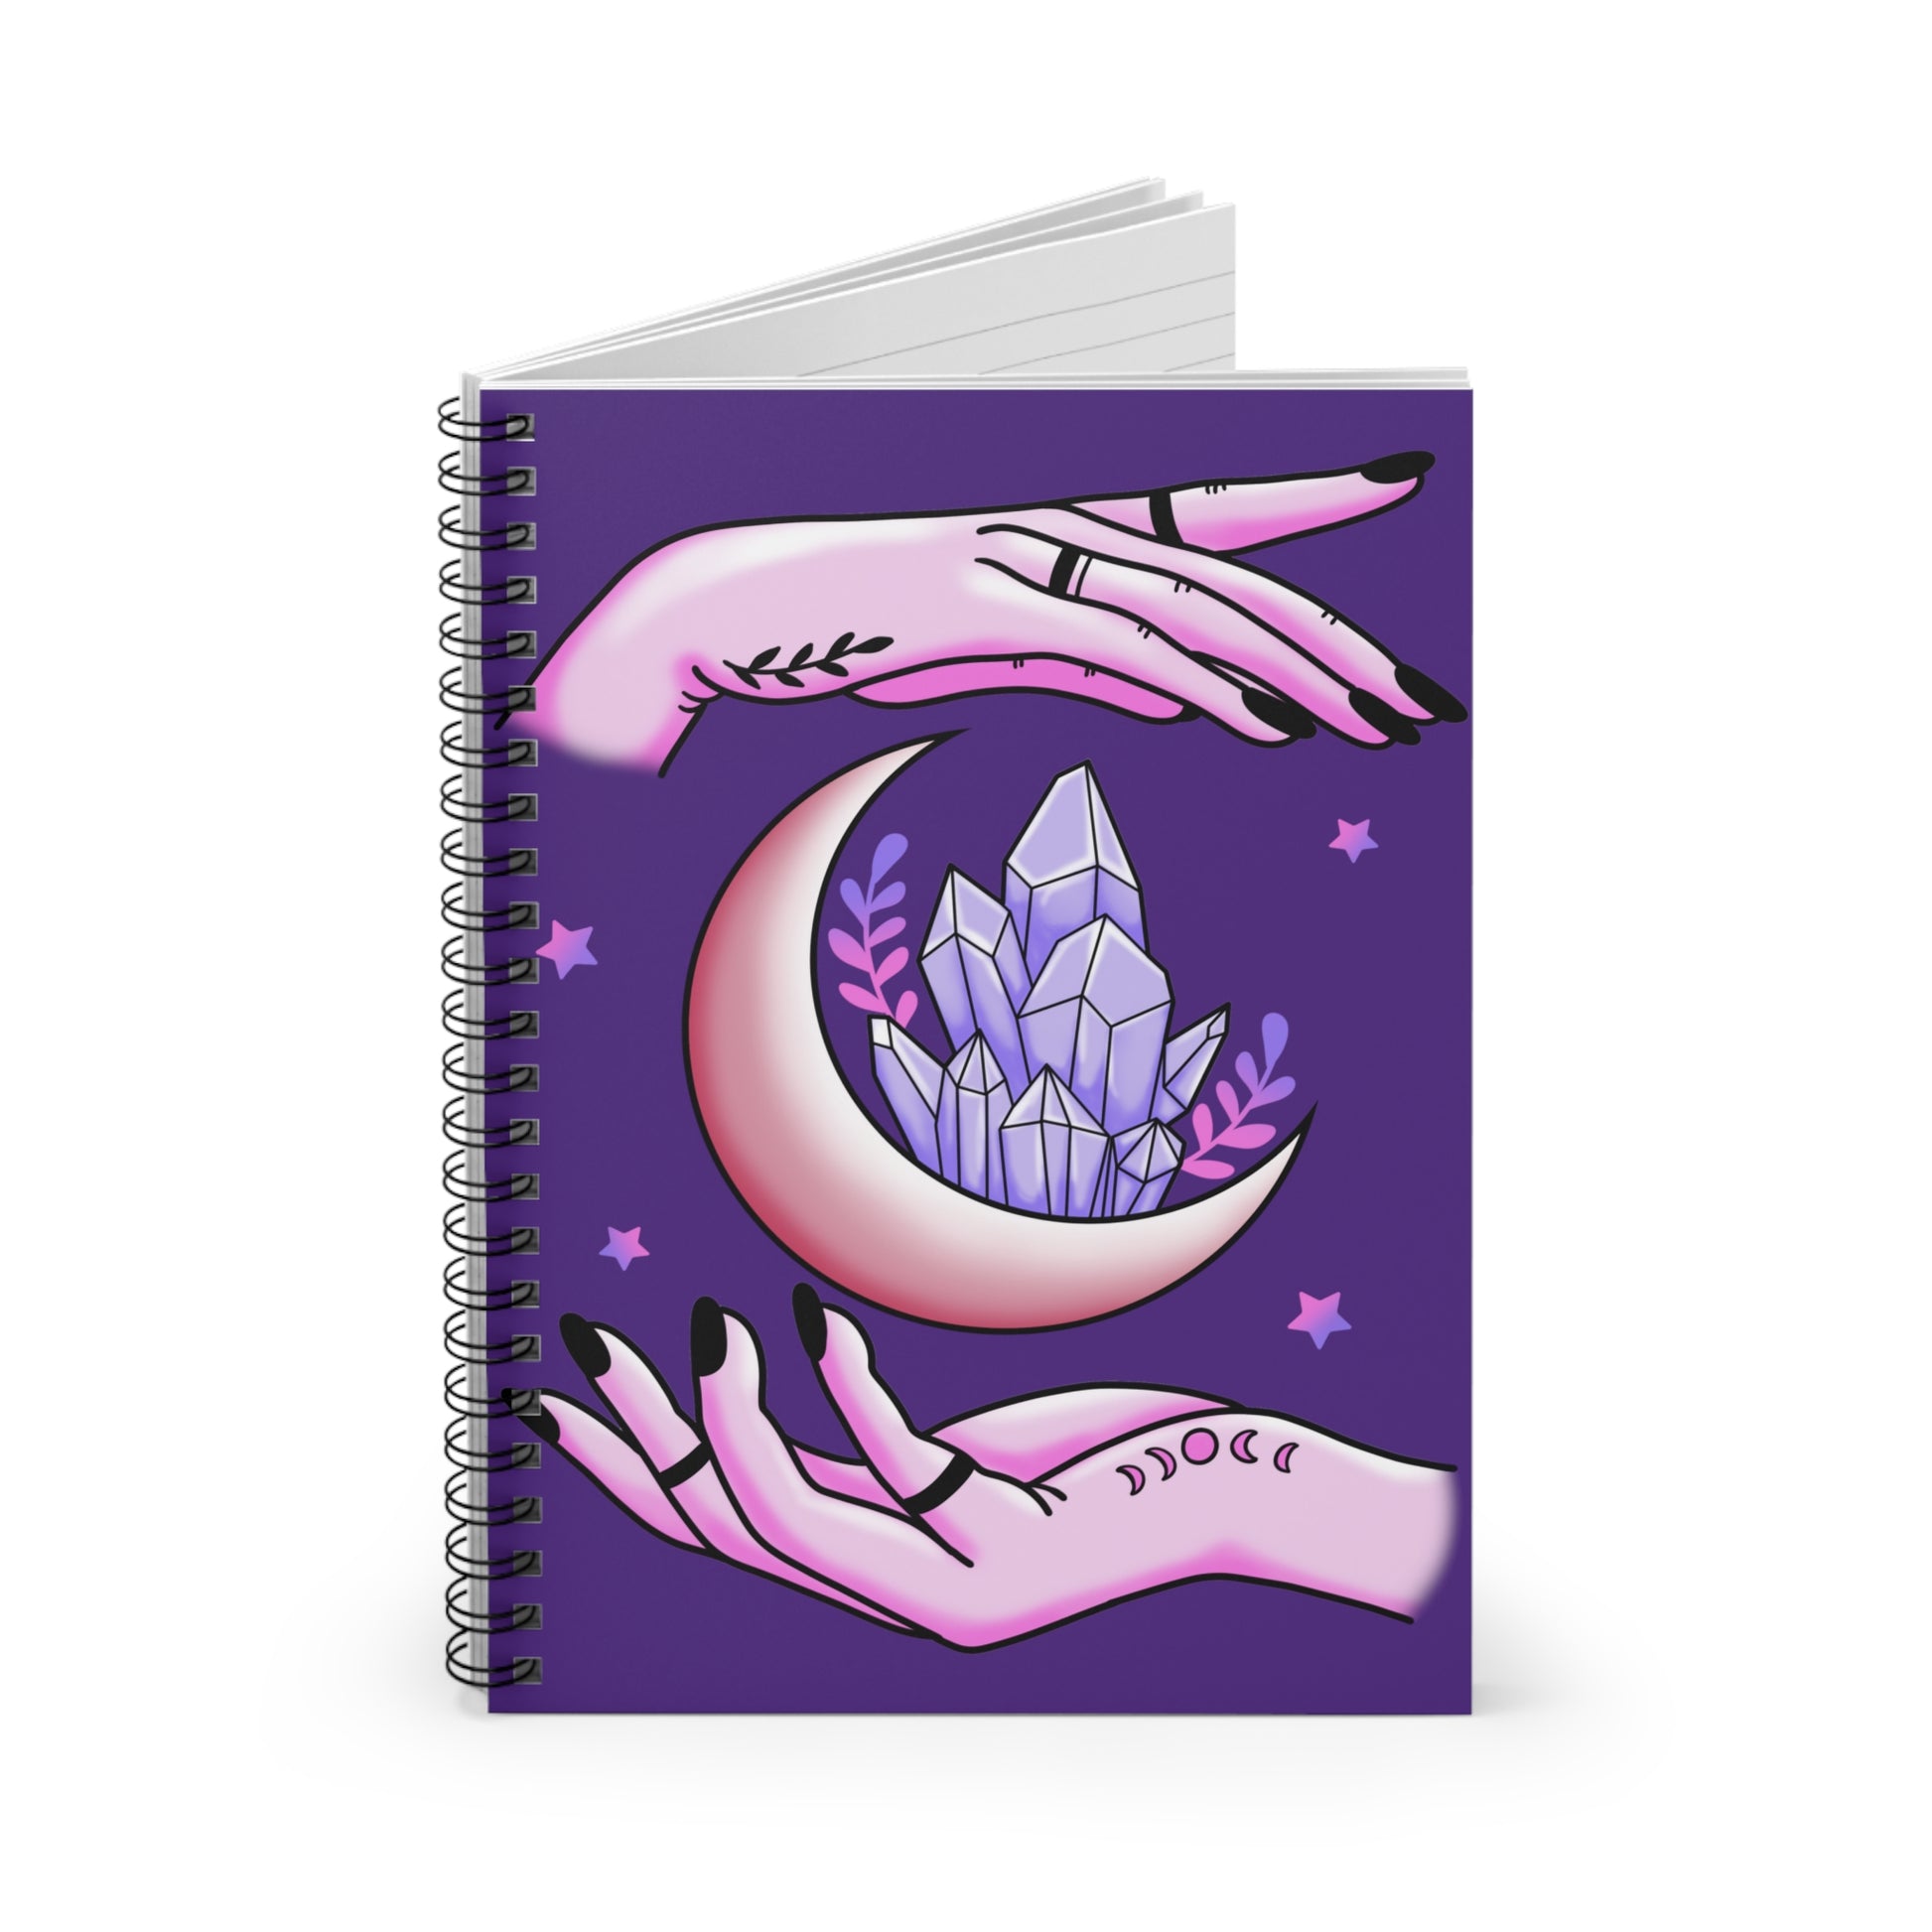 Amethyst Moon Crystals - I Love You: Spiral Notebook - Log Books - Journals - Diaries - and More Custom Printed by TheGlassyLass